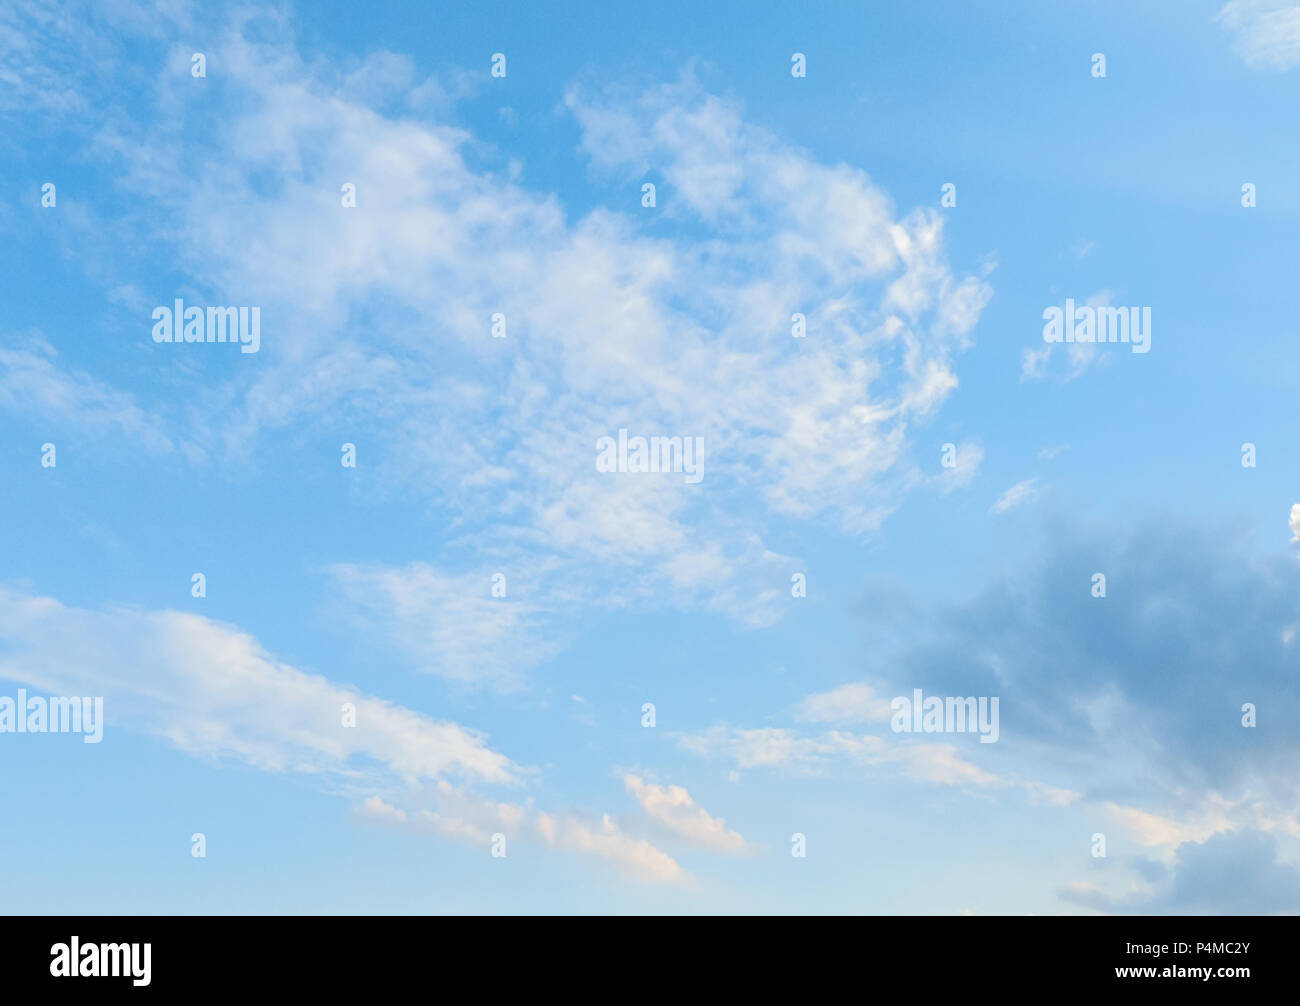 background of fluffy clouds moving over blue sky in a sunny day with copy space. Stock Photo